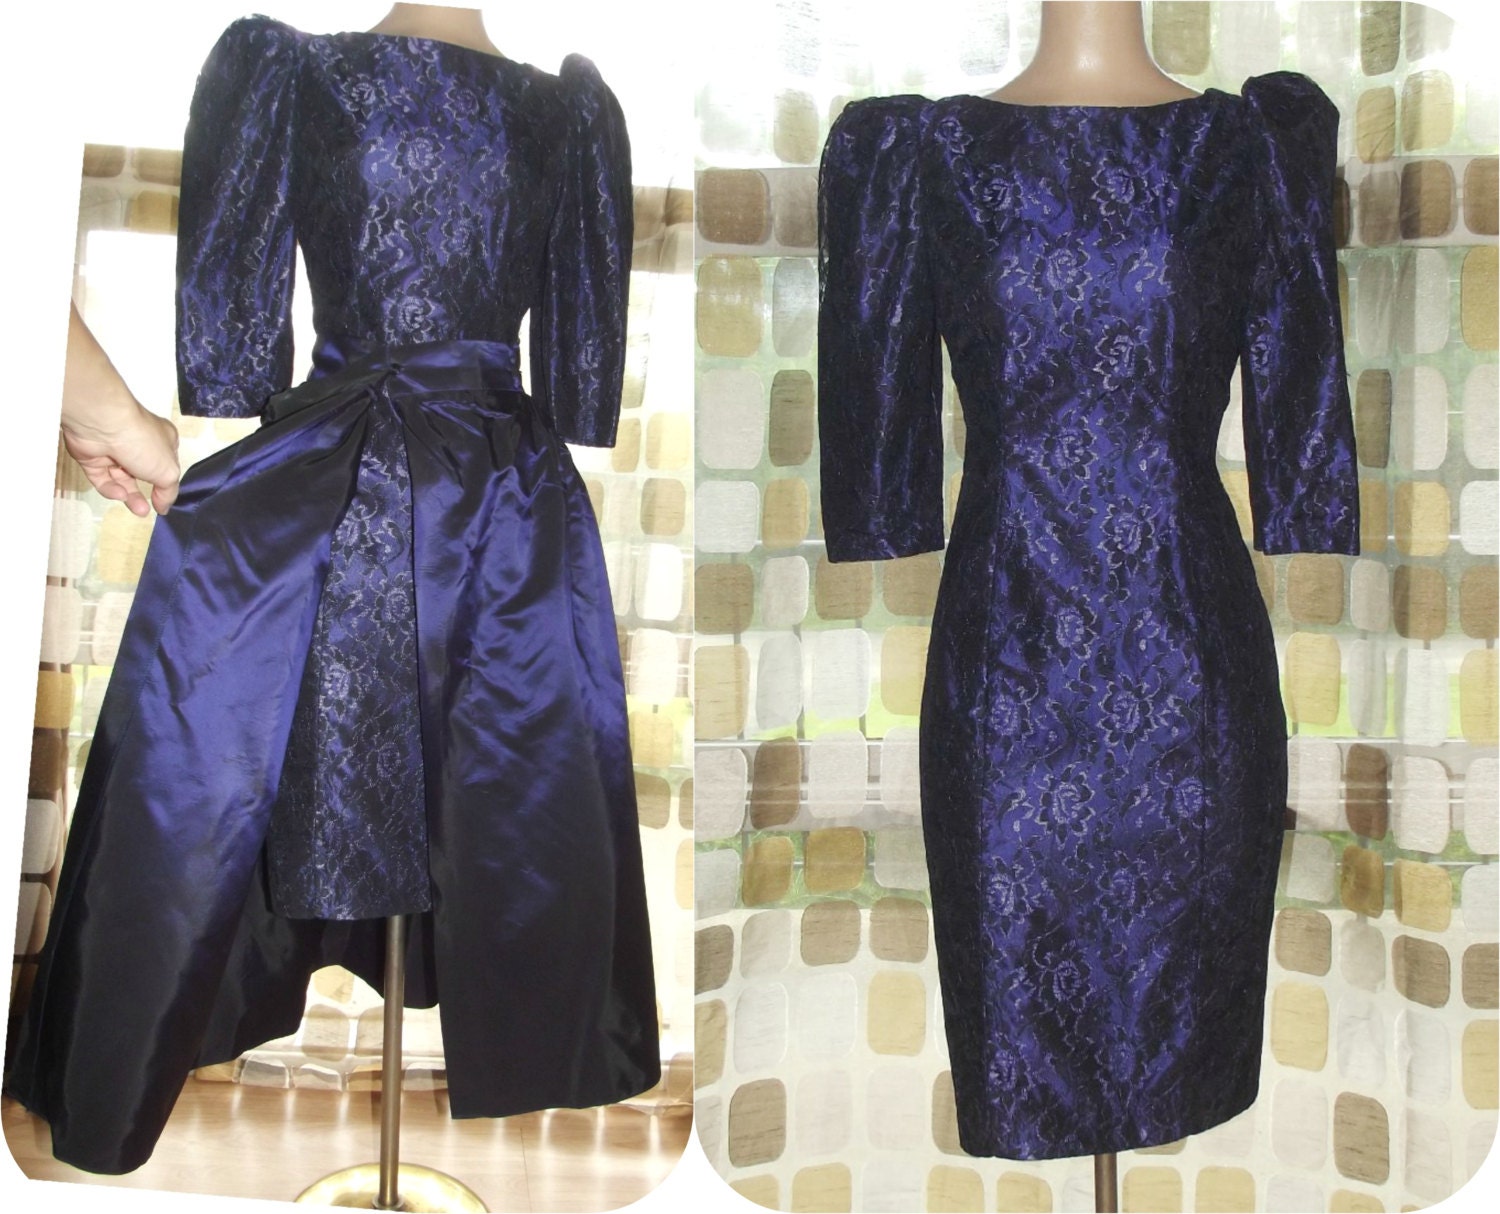 https://www.etsy.com/listing/241450135/vintage-80s-iridescent-deep-purple?ga_search_query=formal+dress&ref=shop_items_search_12